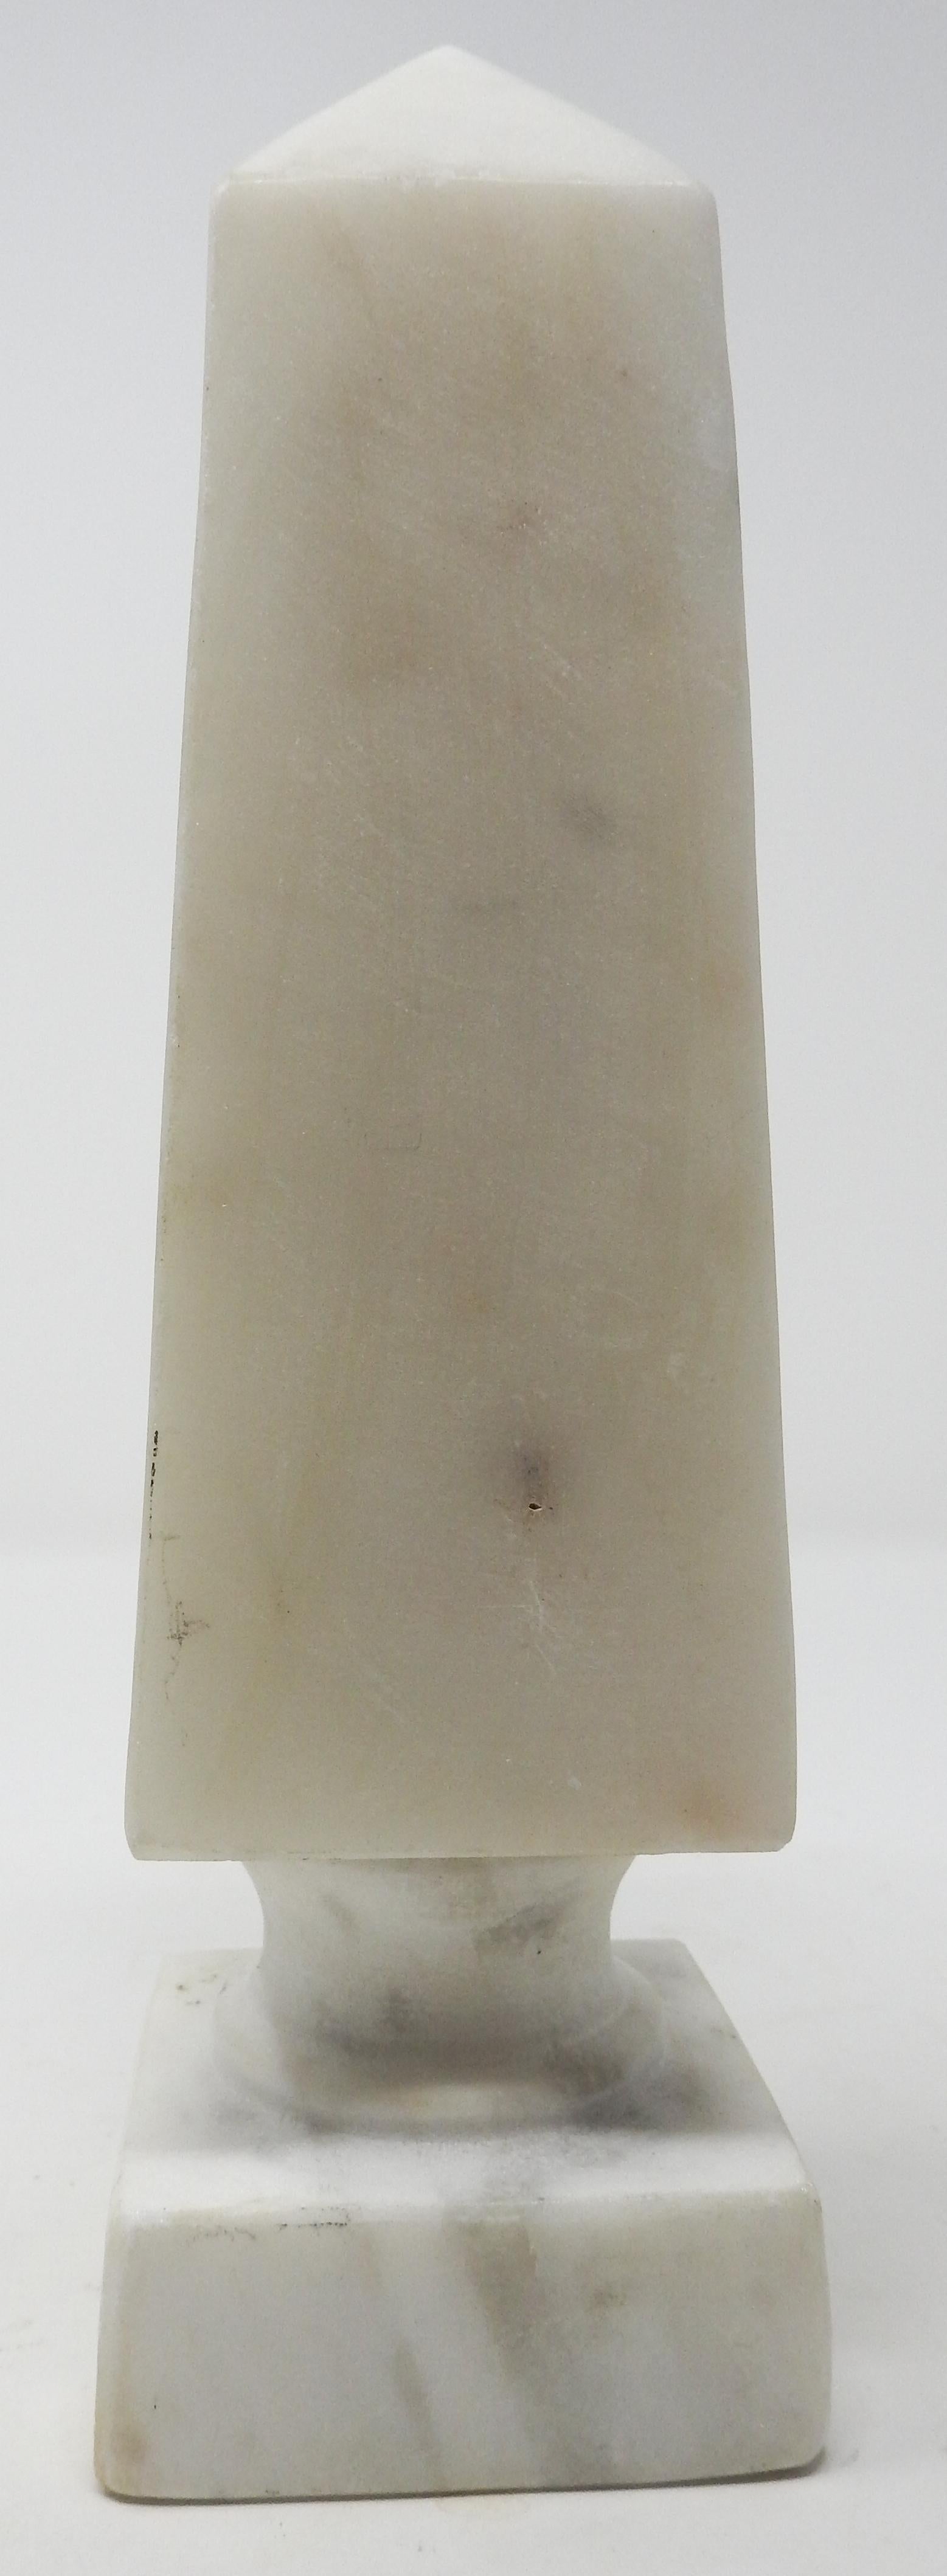 Offering this simple white Carrera marble vintage obelisk. Starting on a square base it rises to a smaller round riser. The main part of the obelisk is scaled evenly with the bottom and makes for a great line to the top.